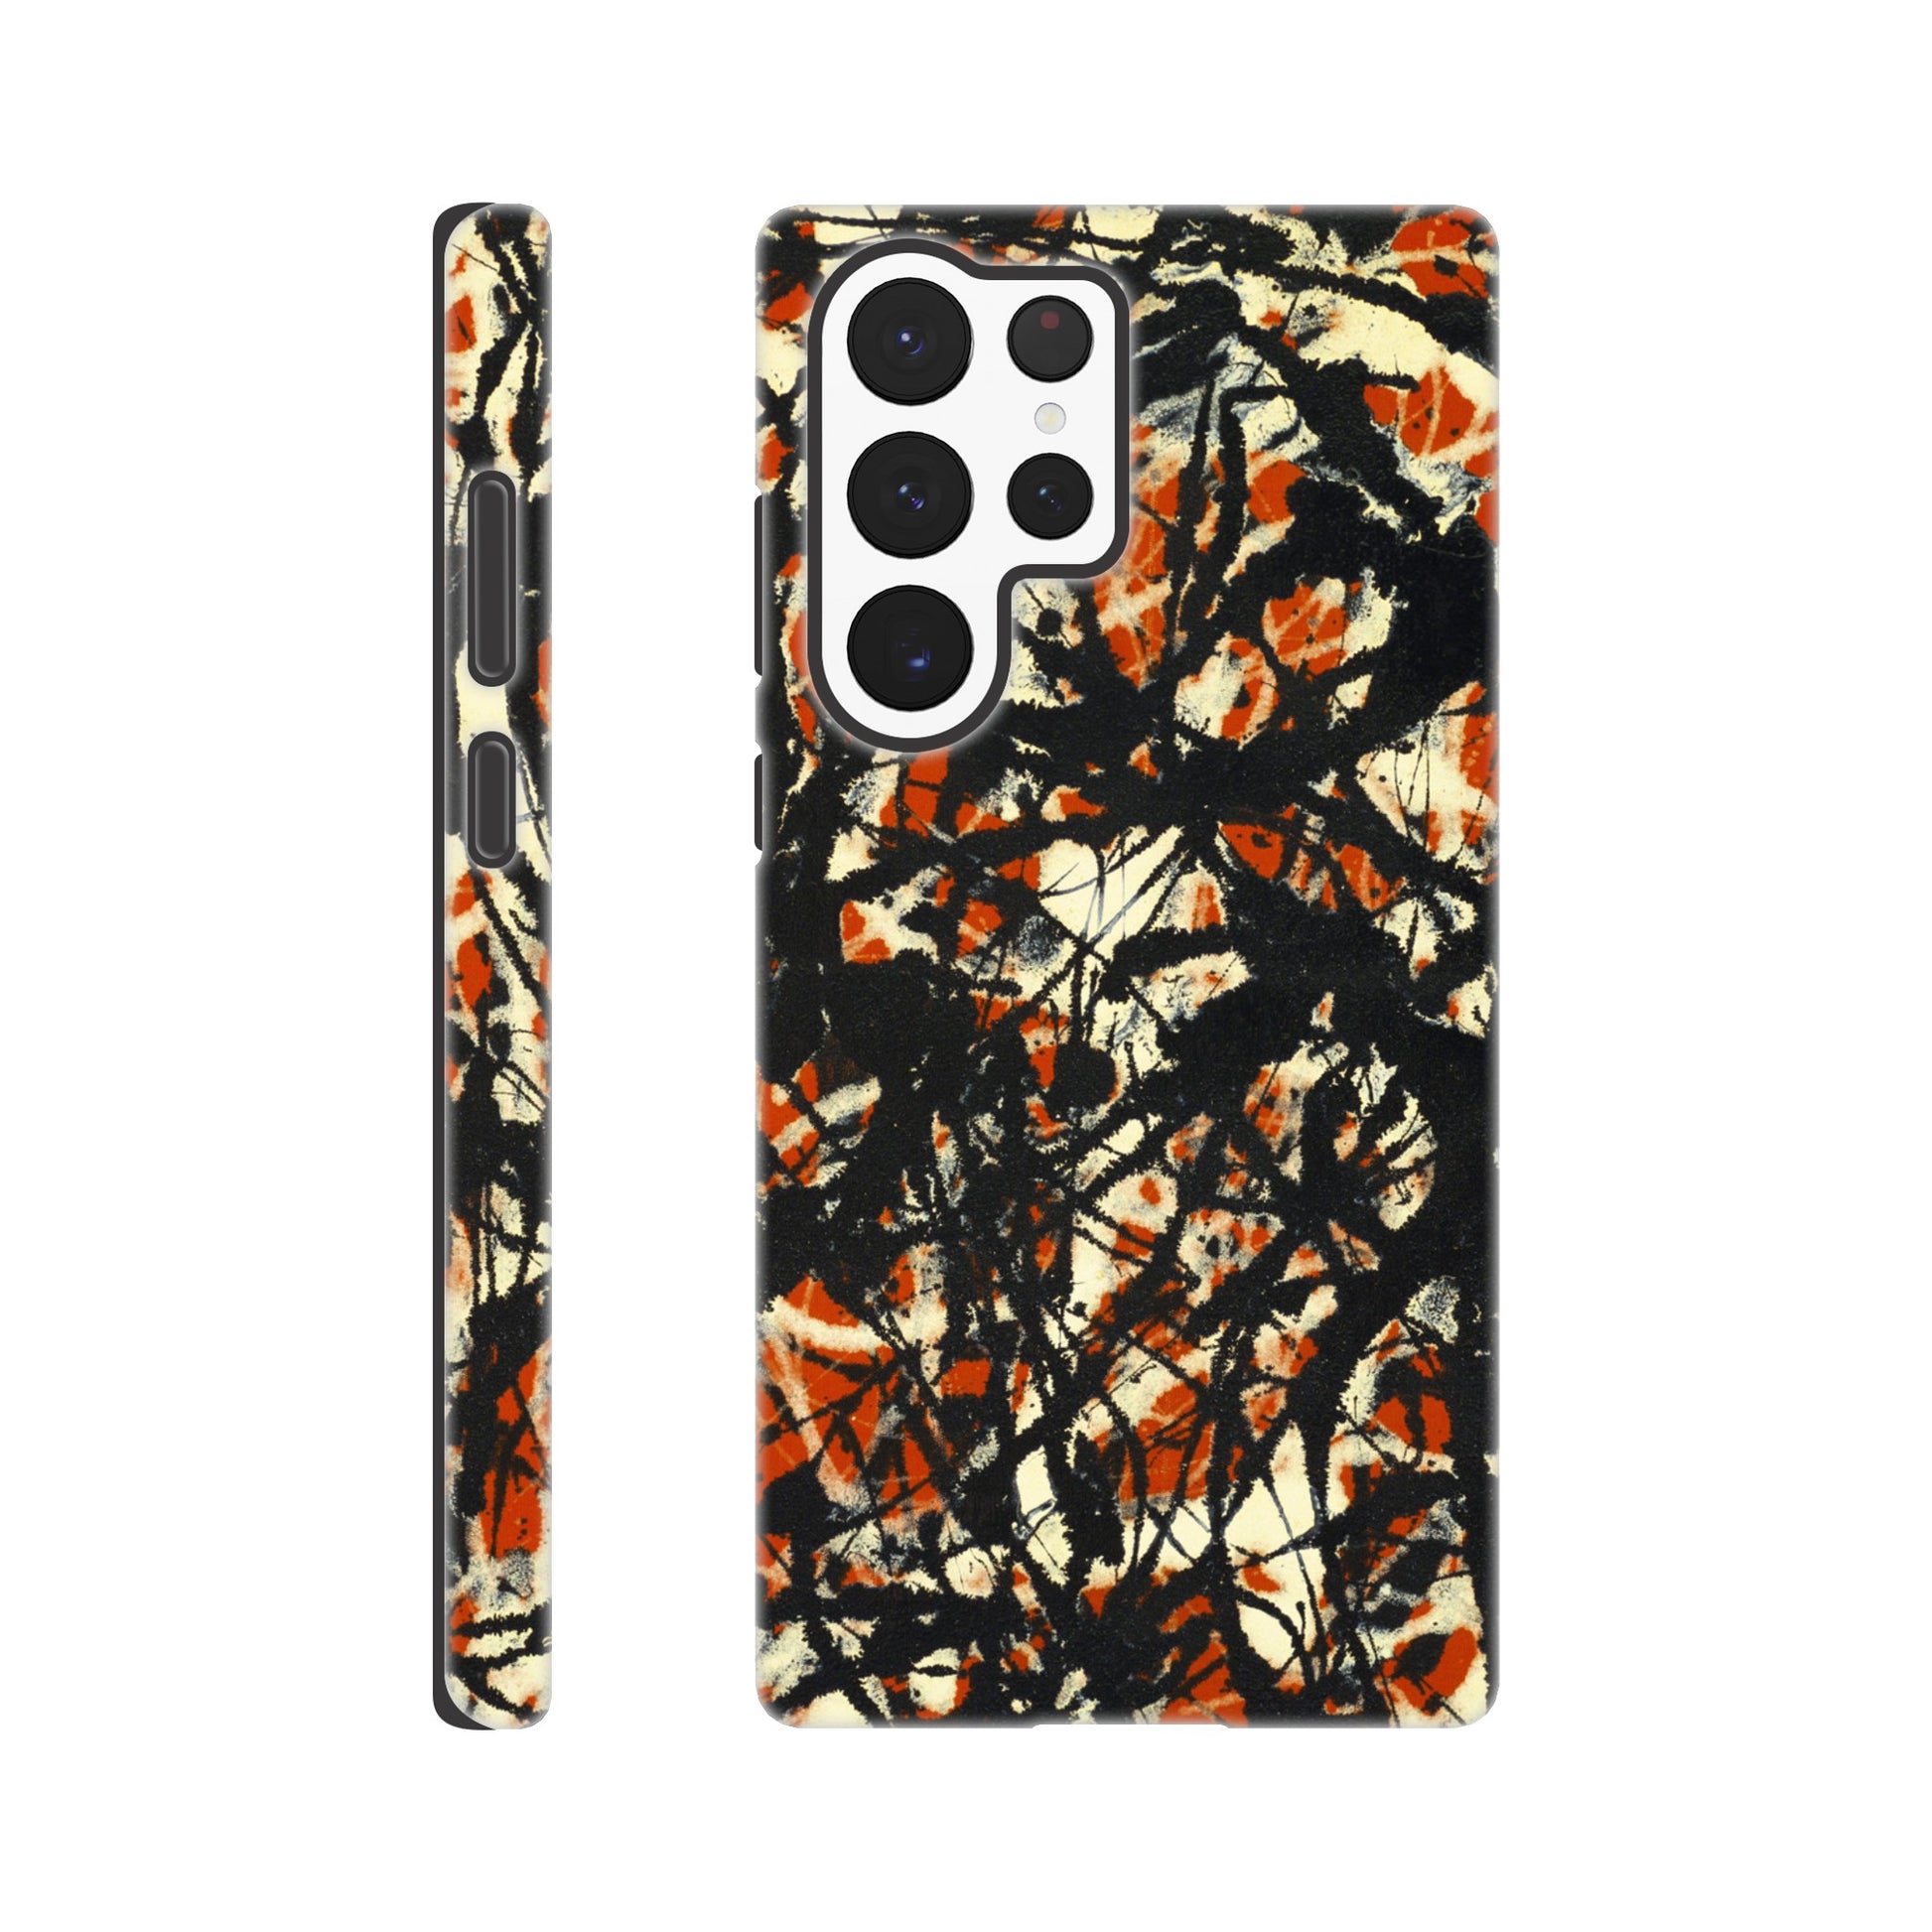 a phone case with an orange and black design